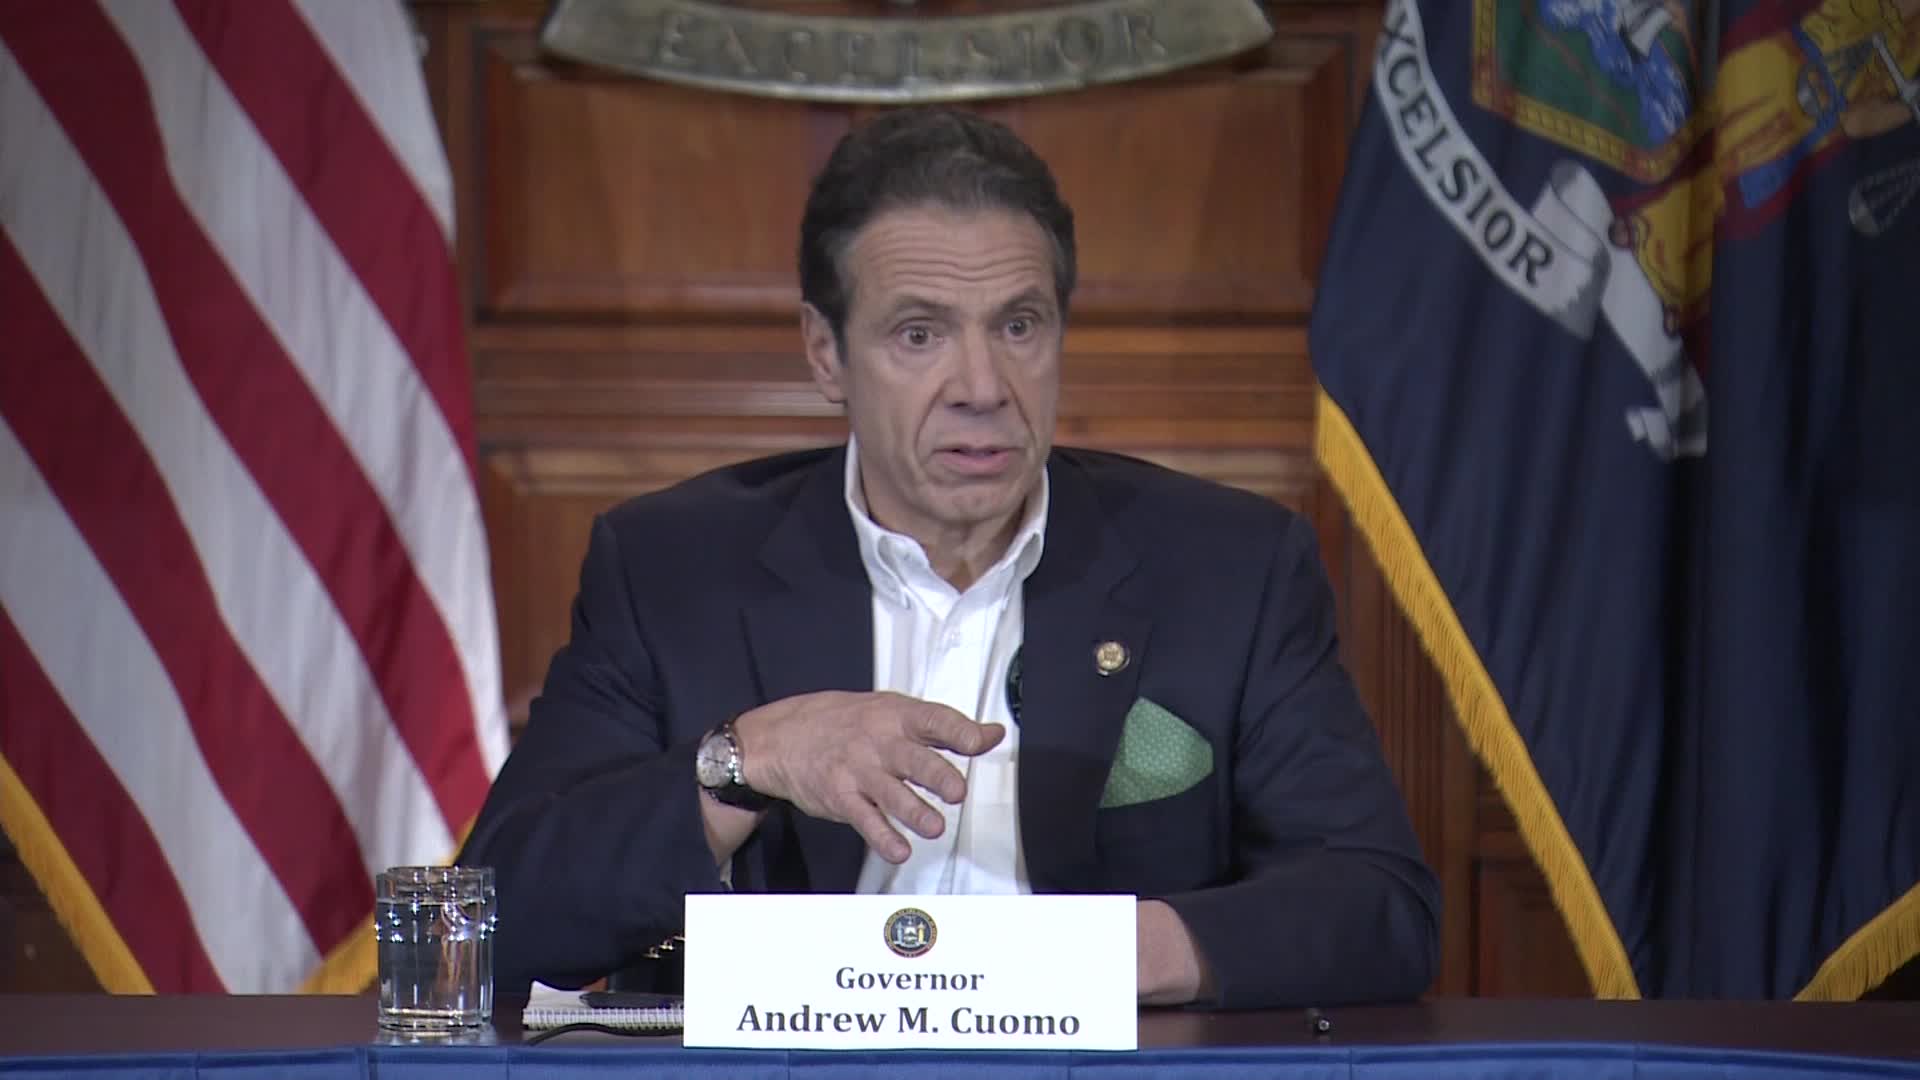 Governor Cuomo makes a statement in Albany, New York, on Tuesday.